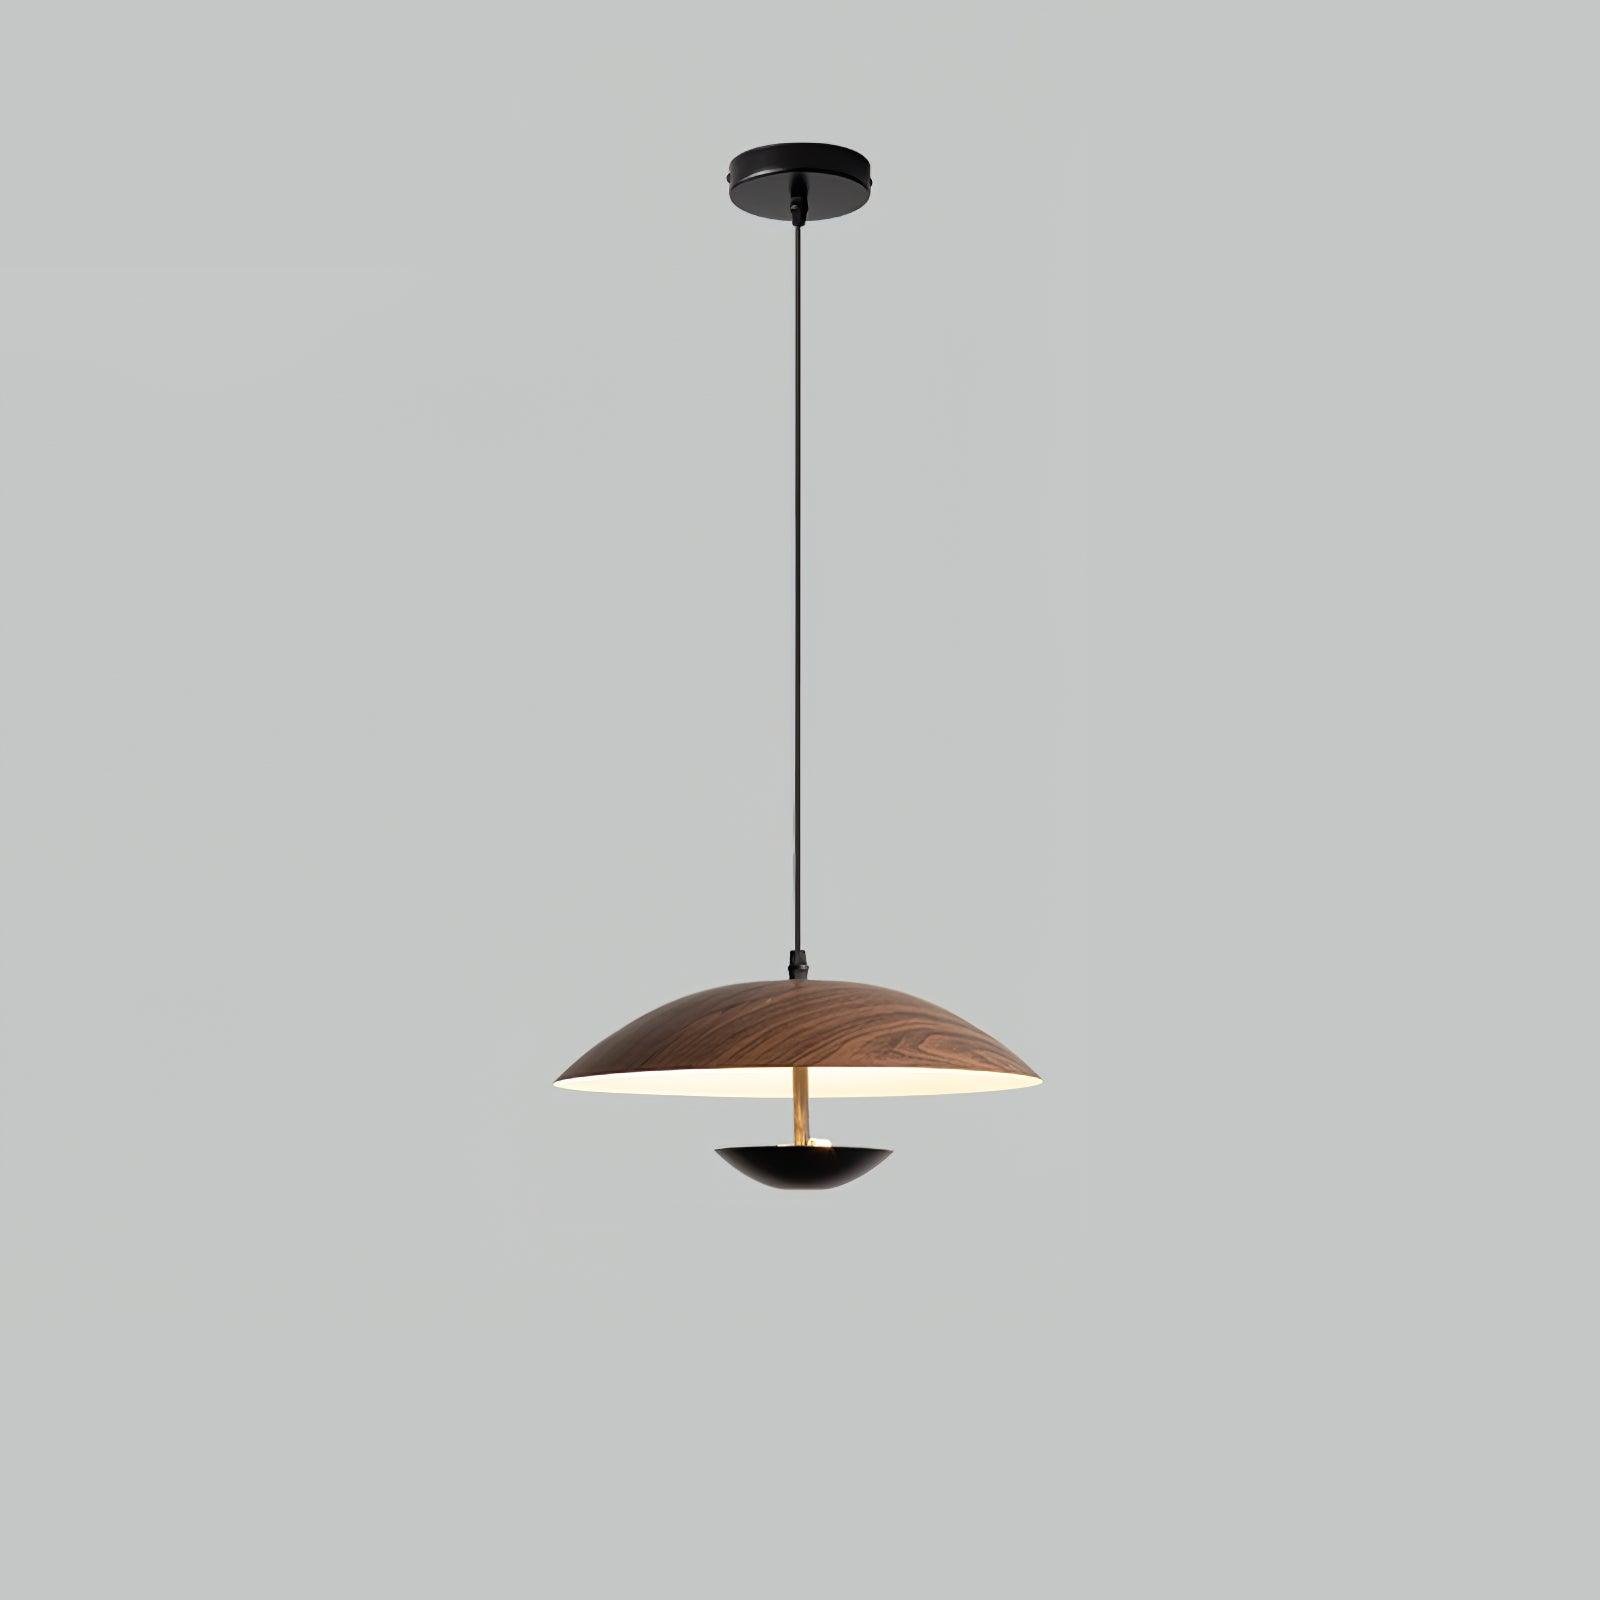 Dark Wood Frisbee Pendant Lamp in Cool White, with a Diameter of 13.8 inches and a Height of 4.7 inches (35cm x 12cm)